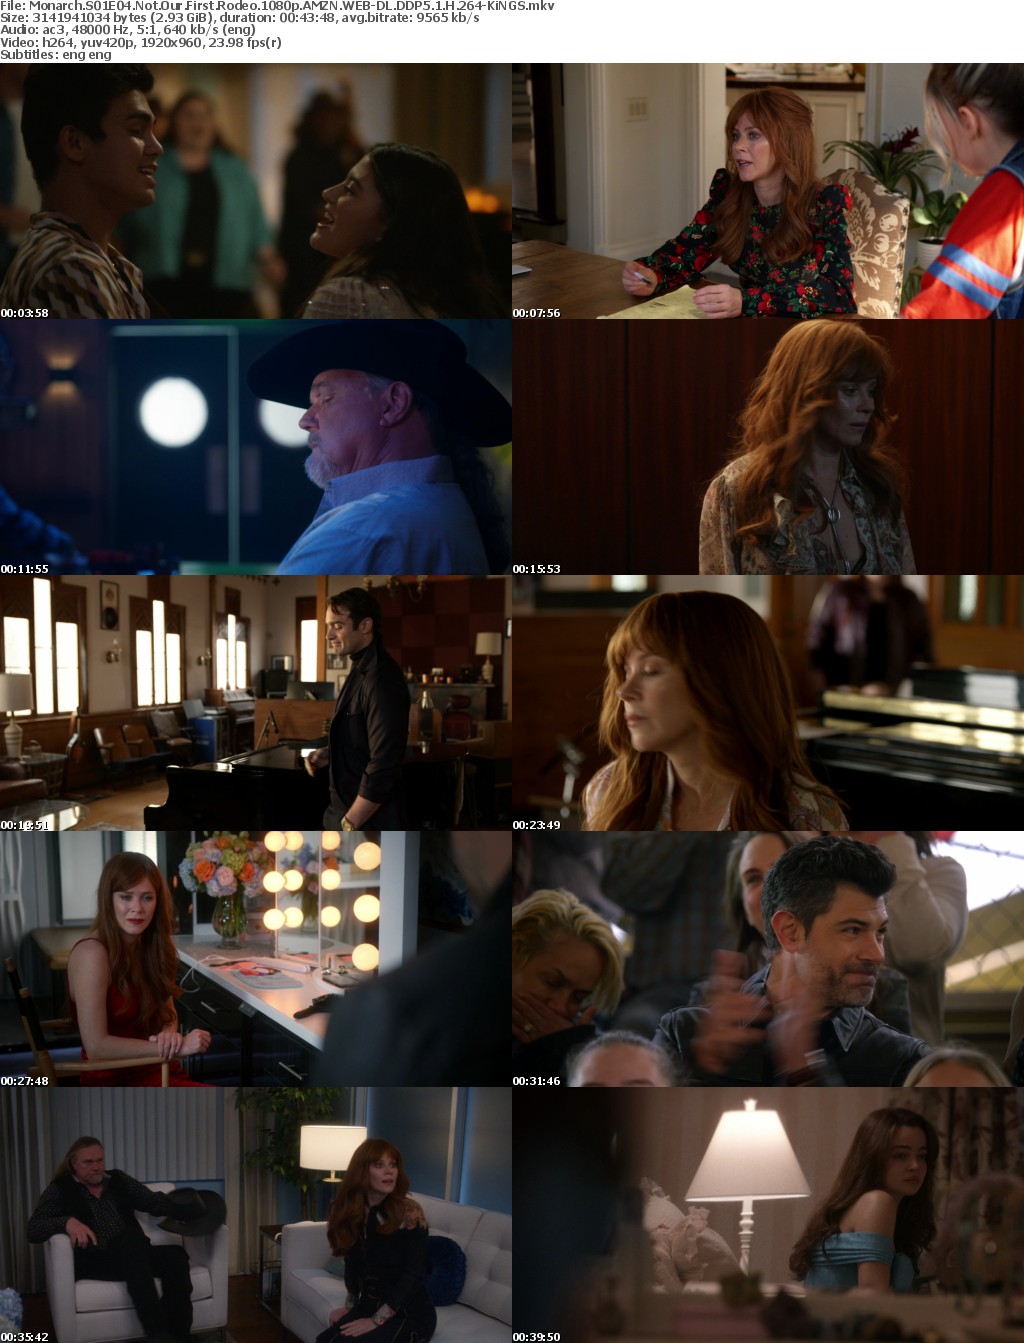 Monarch S01E04 Not Our First Rodeo 1080p AMZN WEBRip DDP5 1 x264-KiNGS